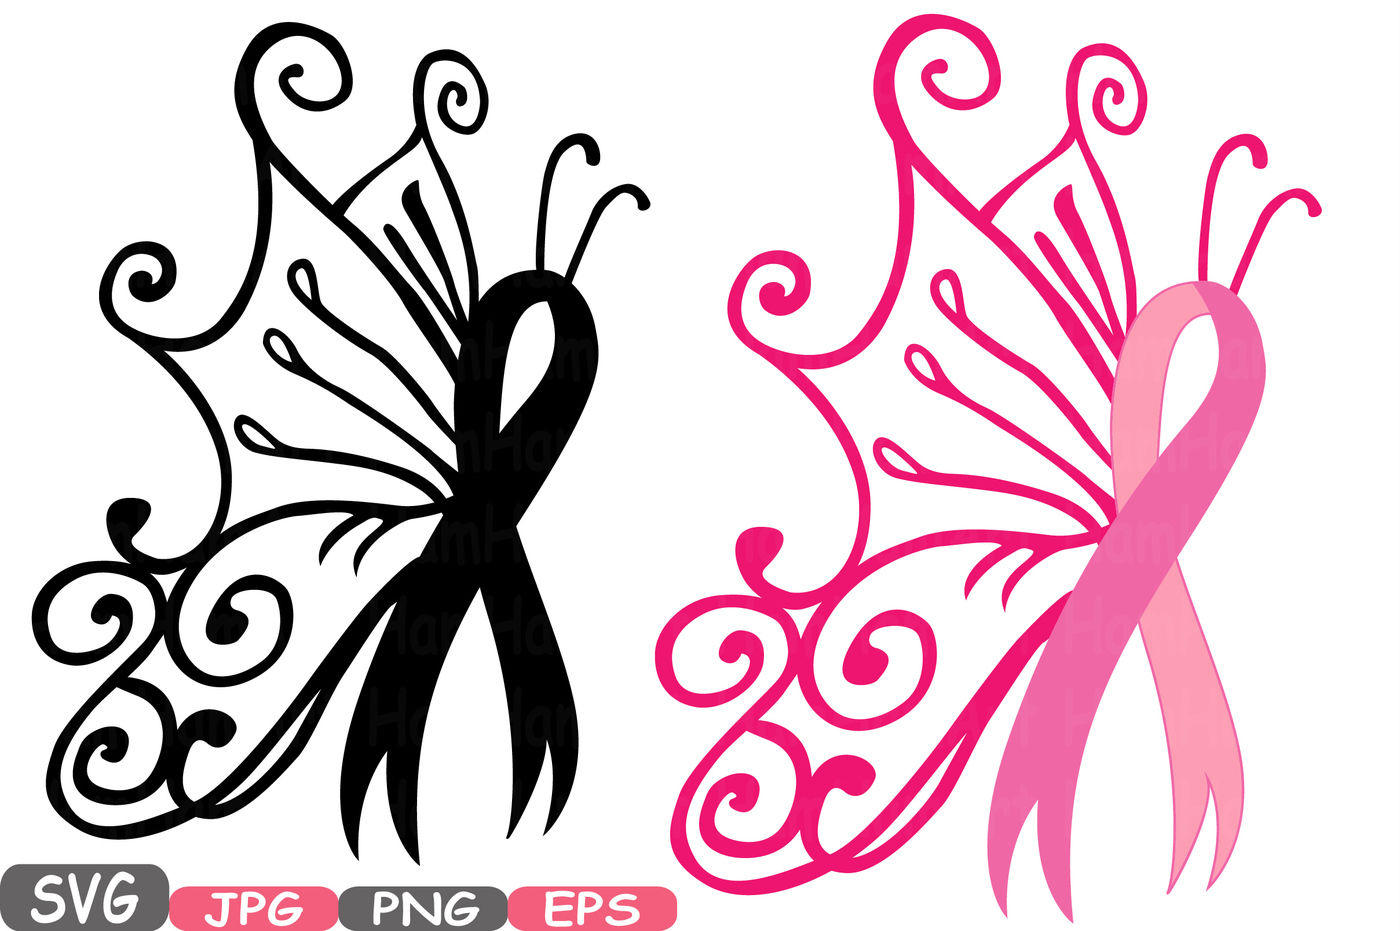 Download Swirl Design Svg for Cricut, Silhouette, Brother Scan N Cut